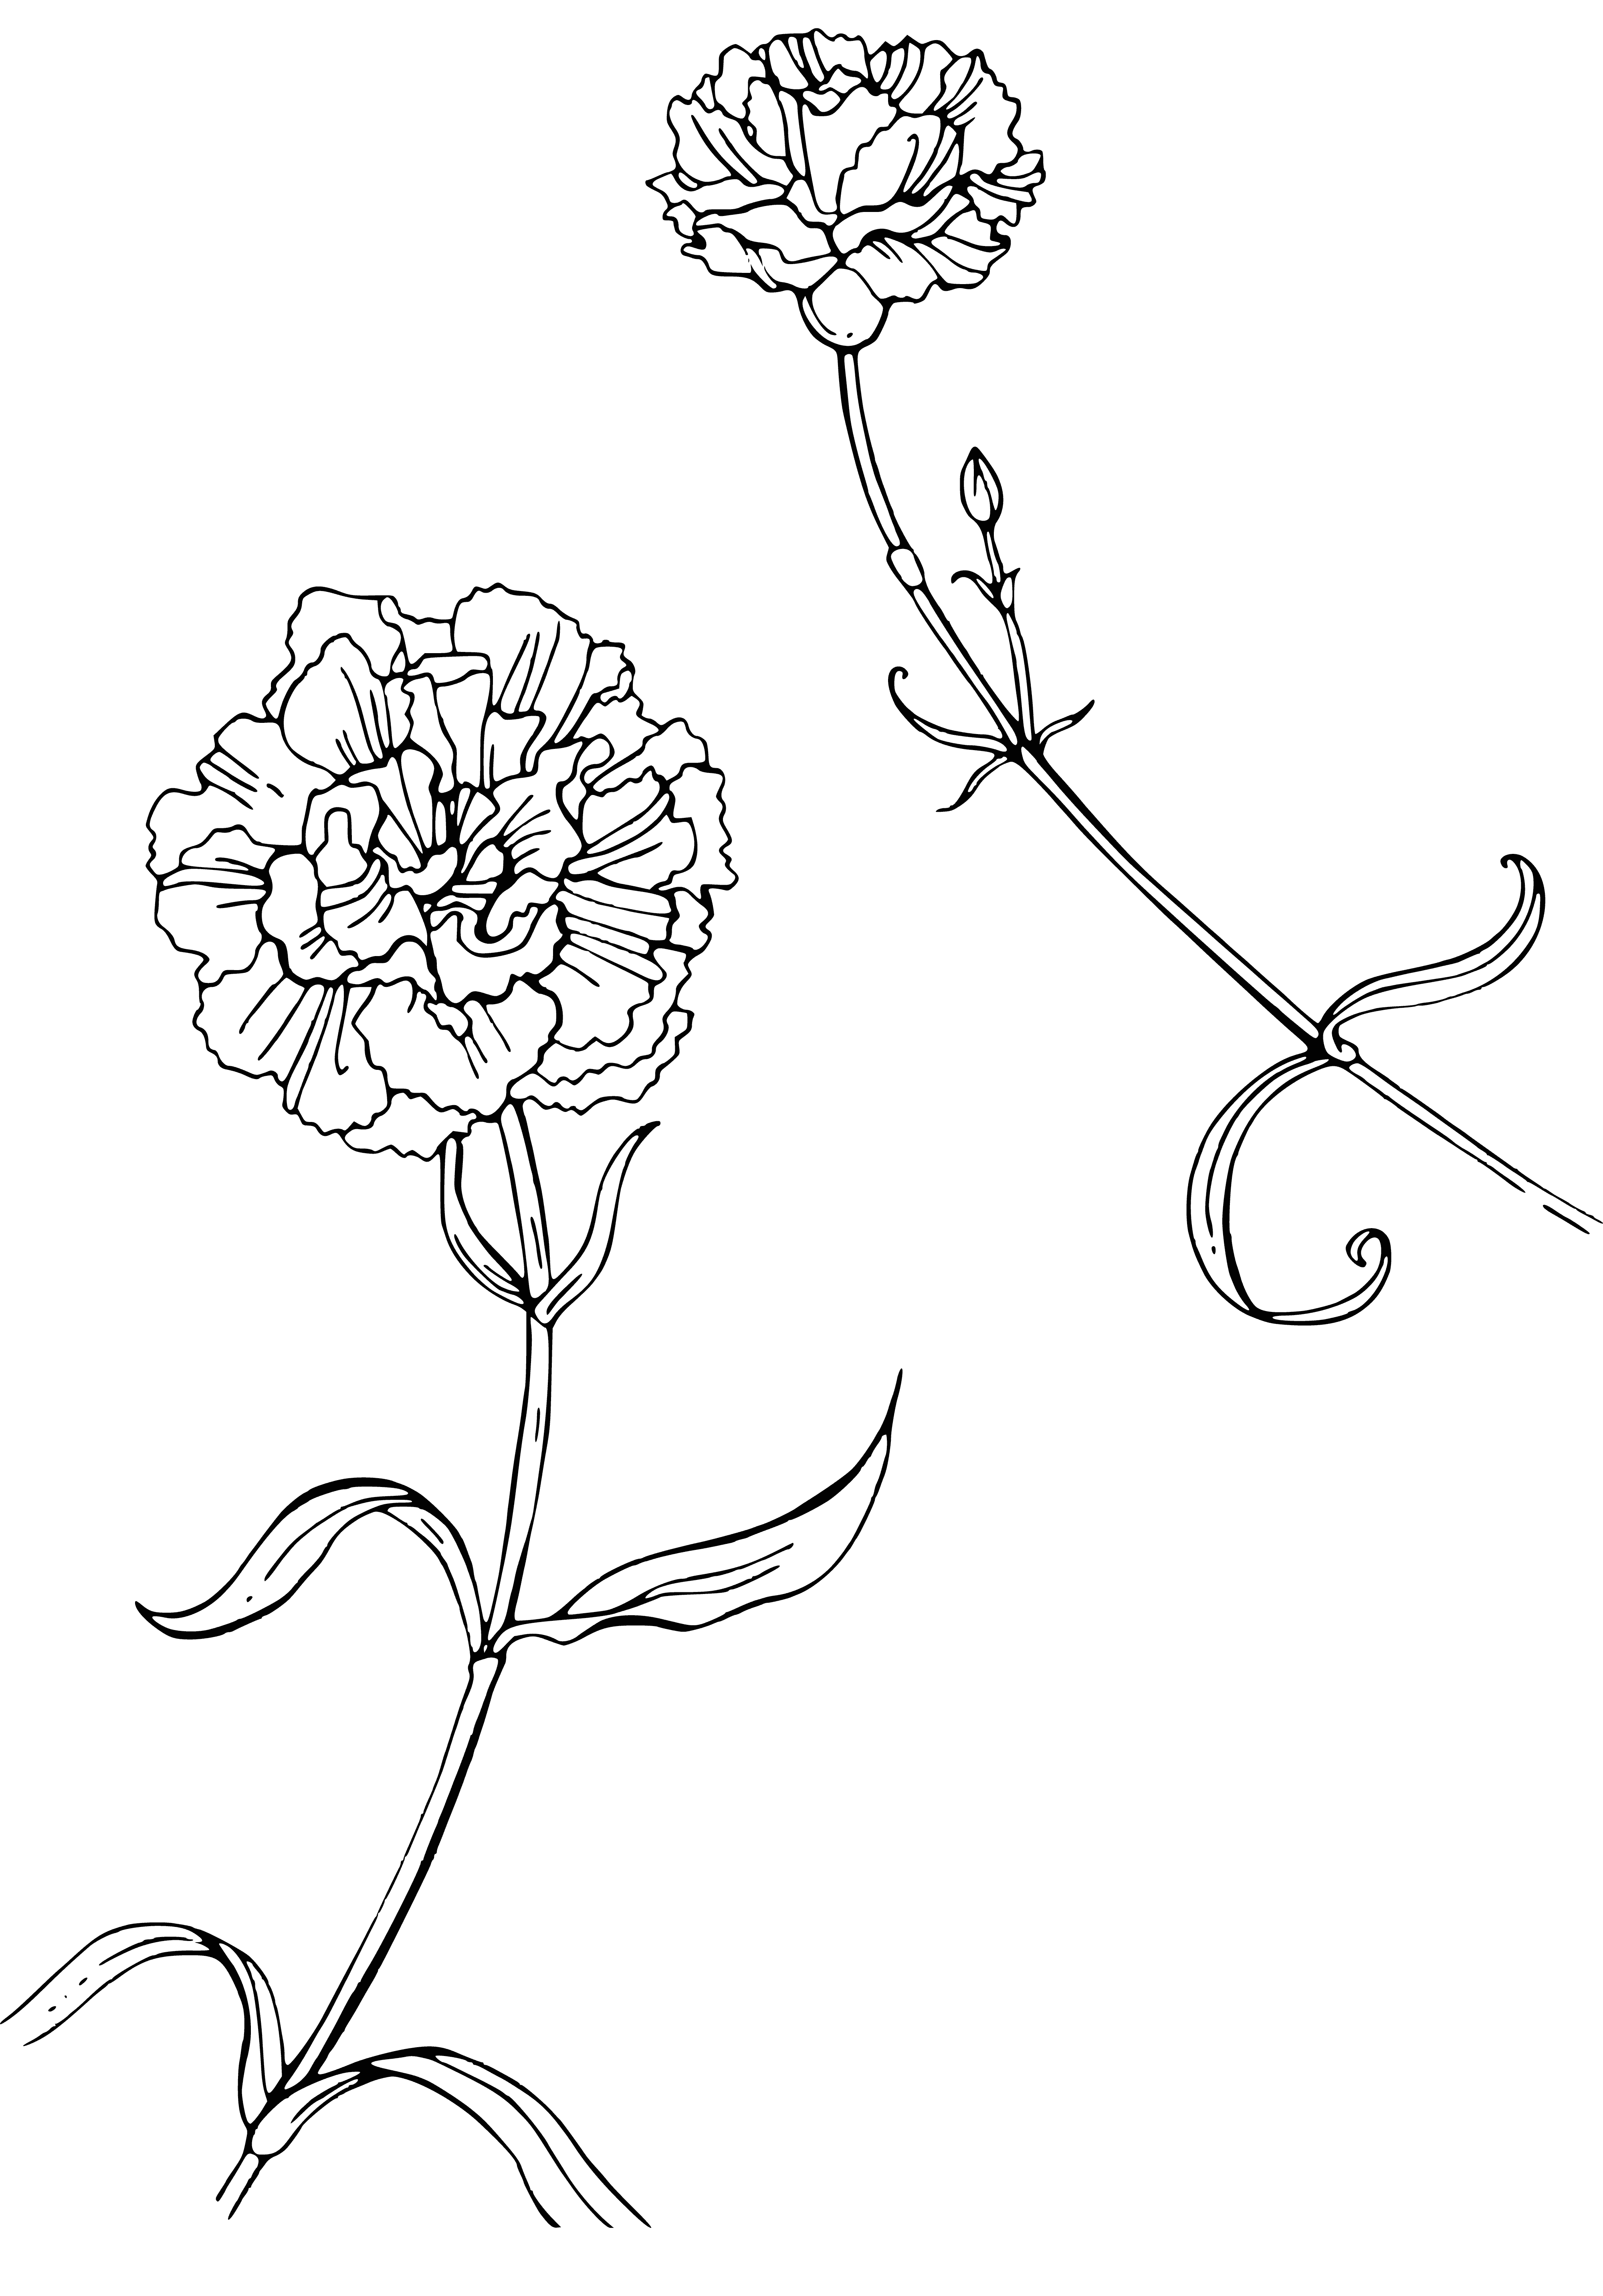 coloring page: Tons of colorful carnations in a bouquet w/ petals of same color, long green stems & leaves scattered throughout.